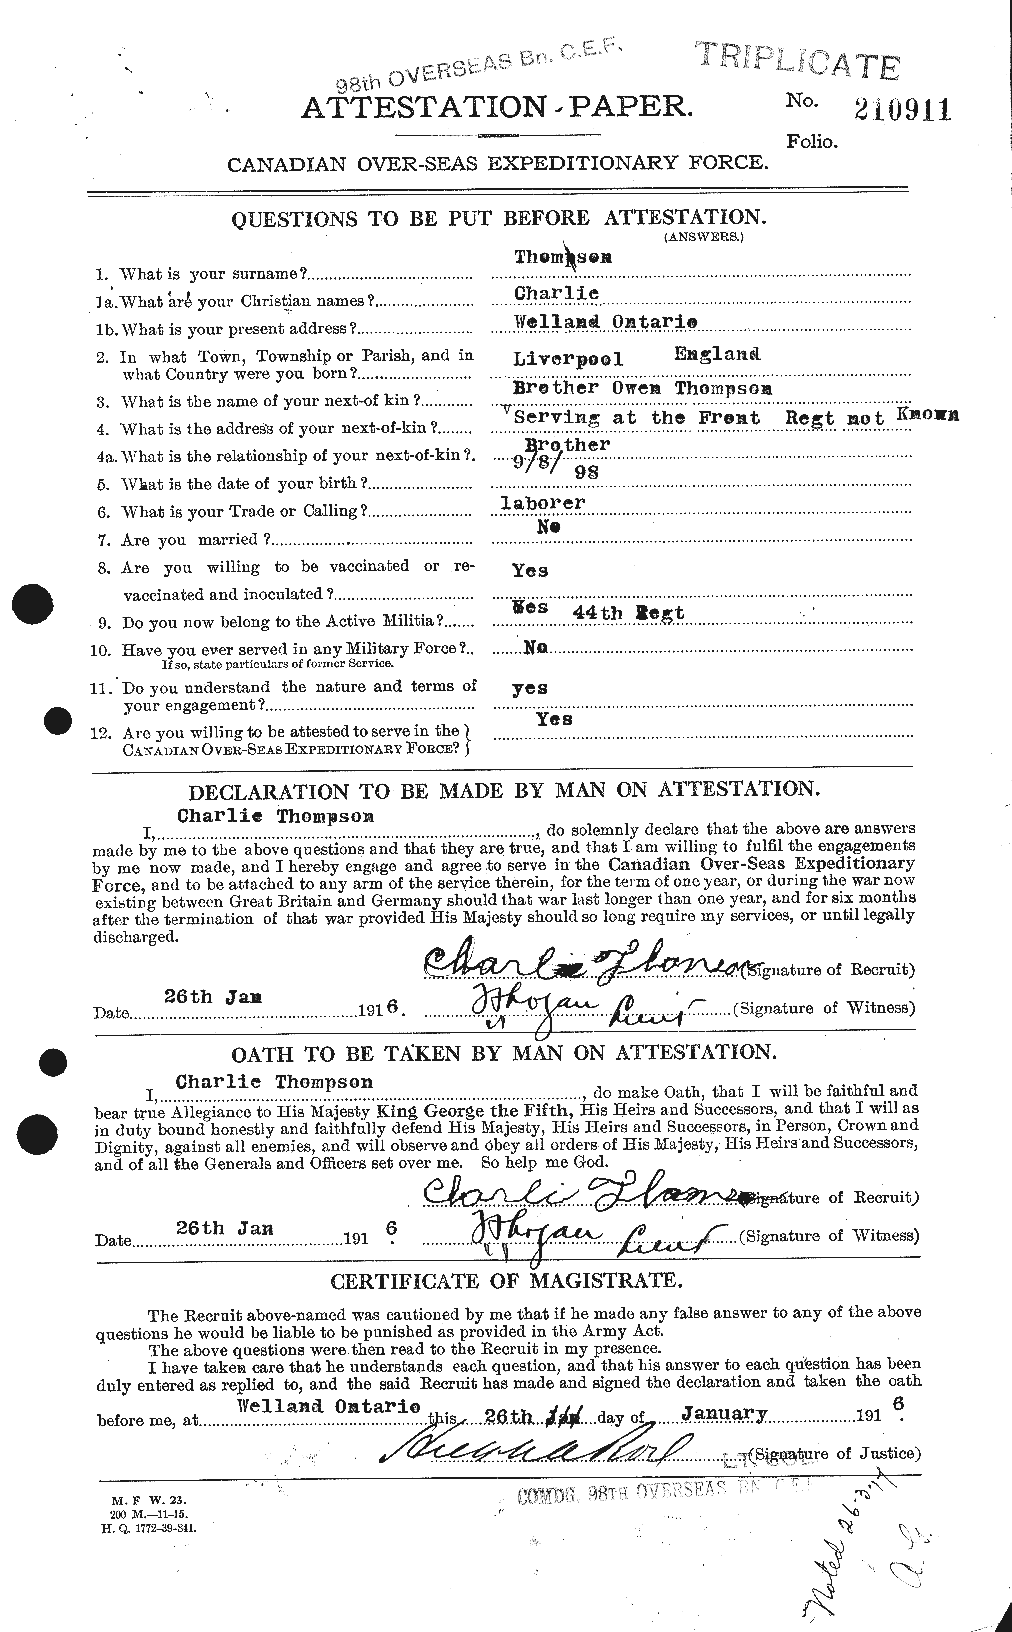 Personnel Records of the First World War - CEF 632310a